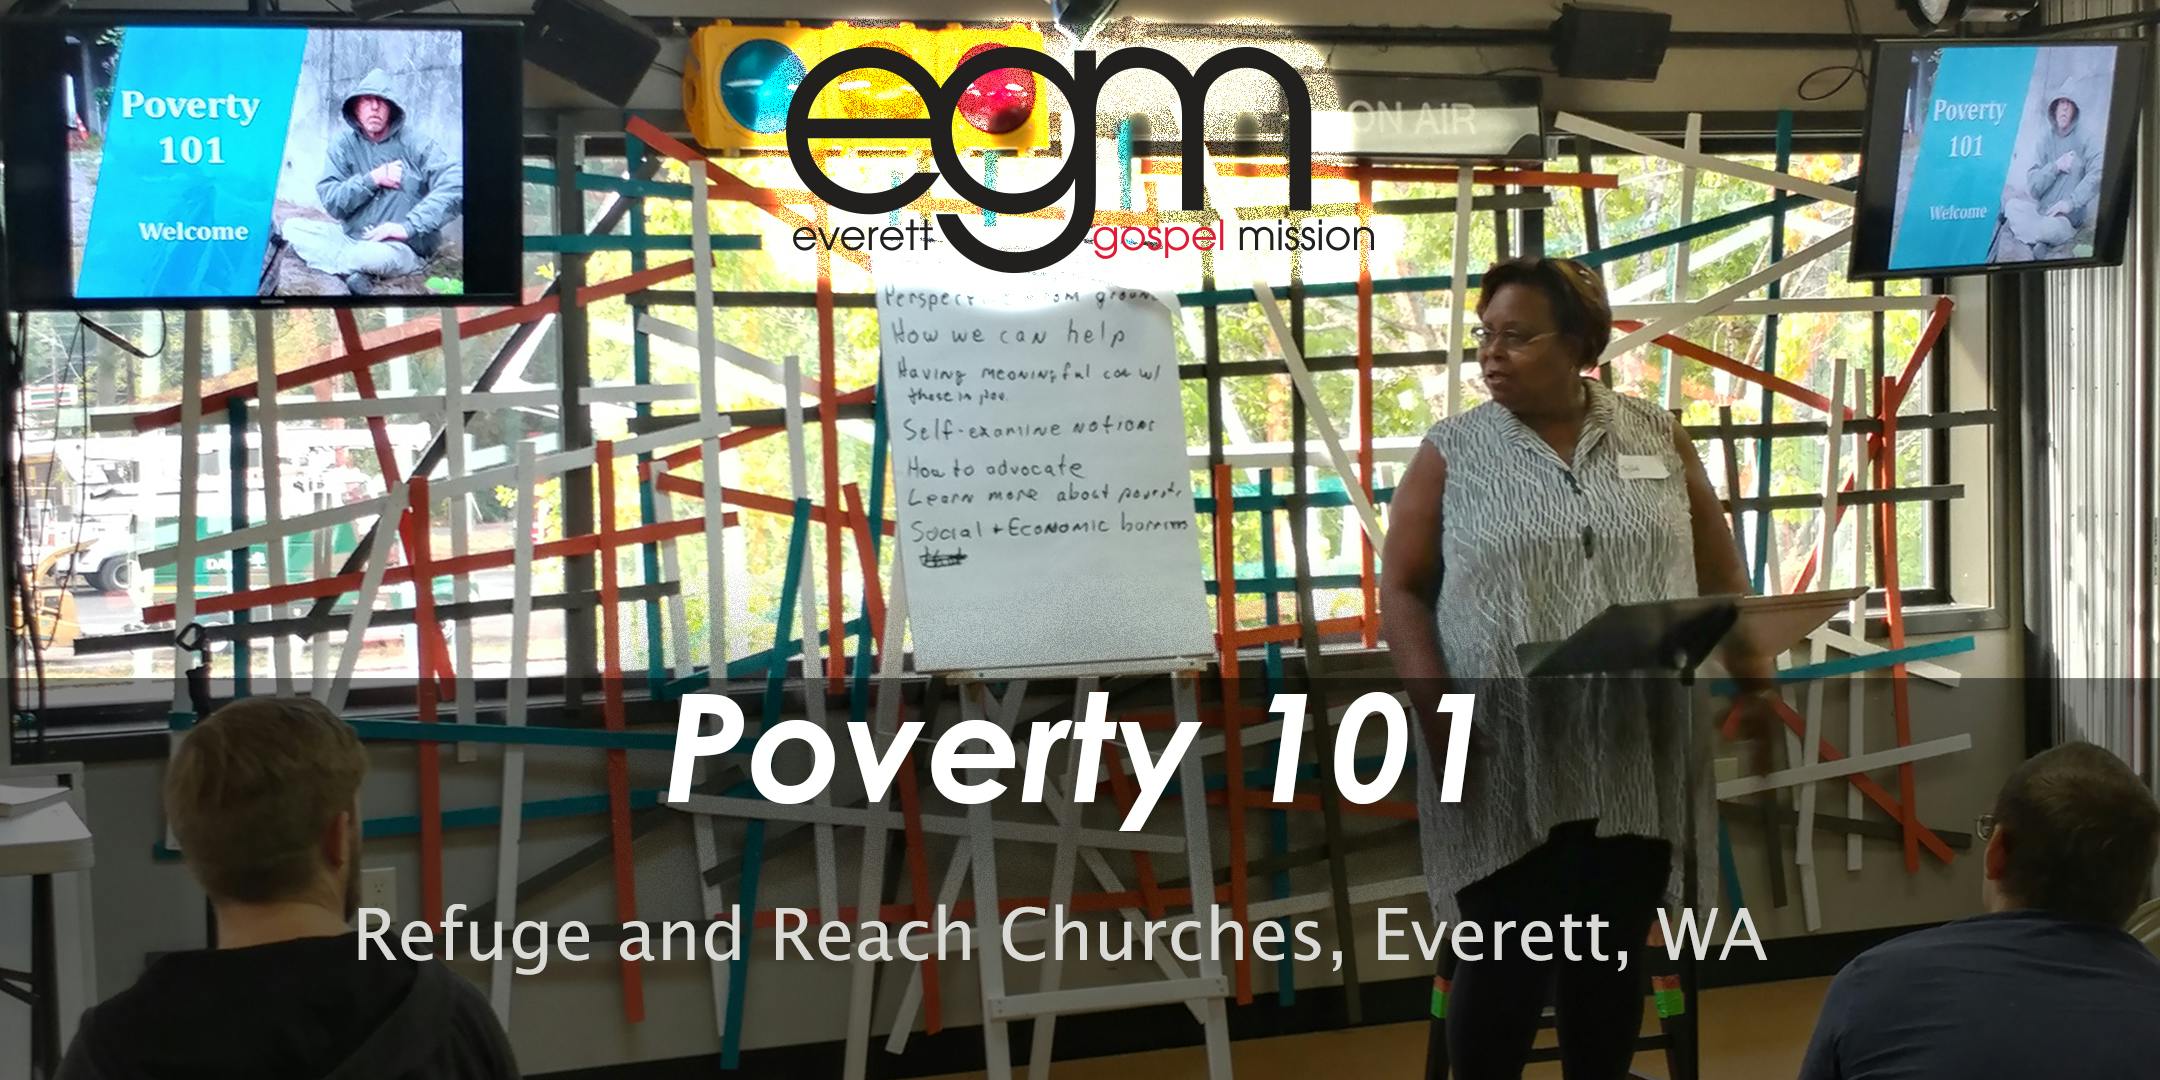 EGM Poverty 101 @ Everett Foursquare Church at Lowell with Reach Church